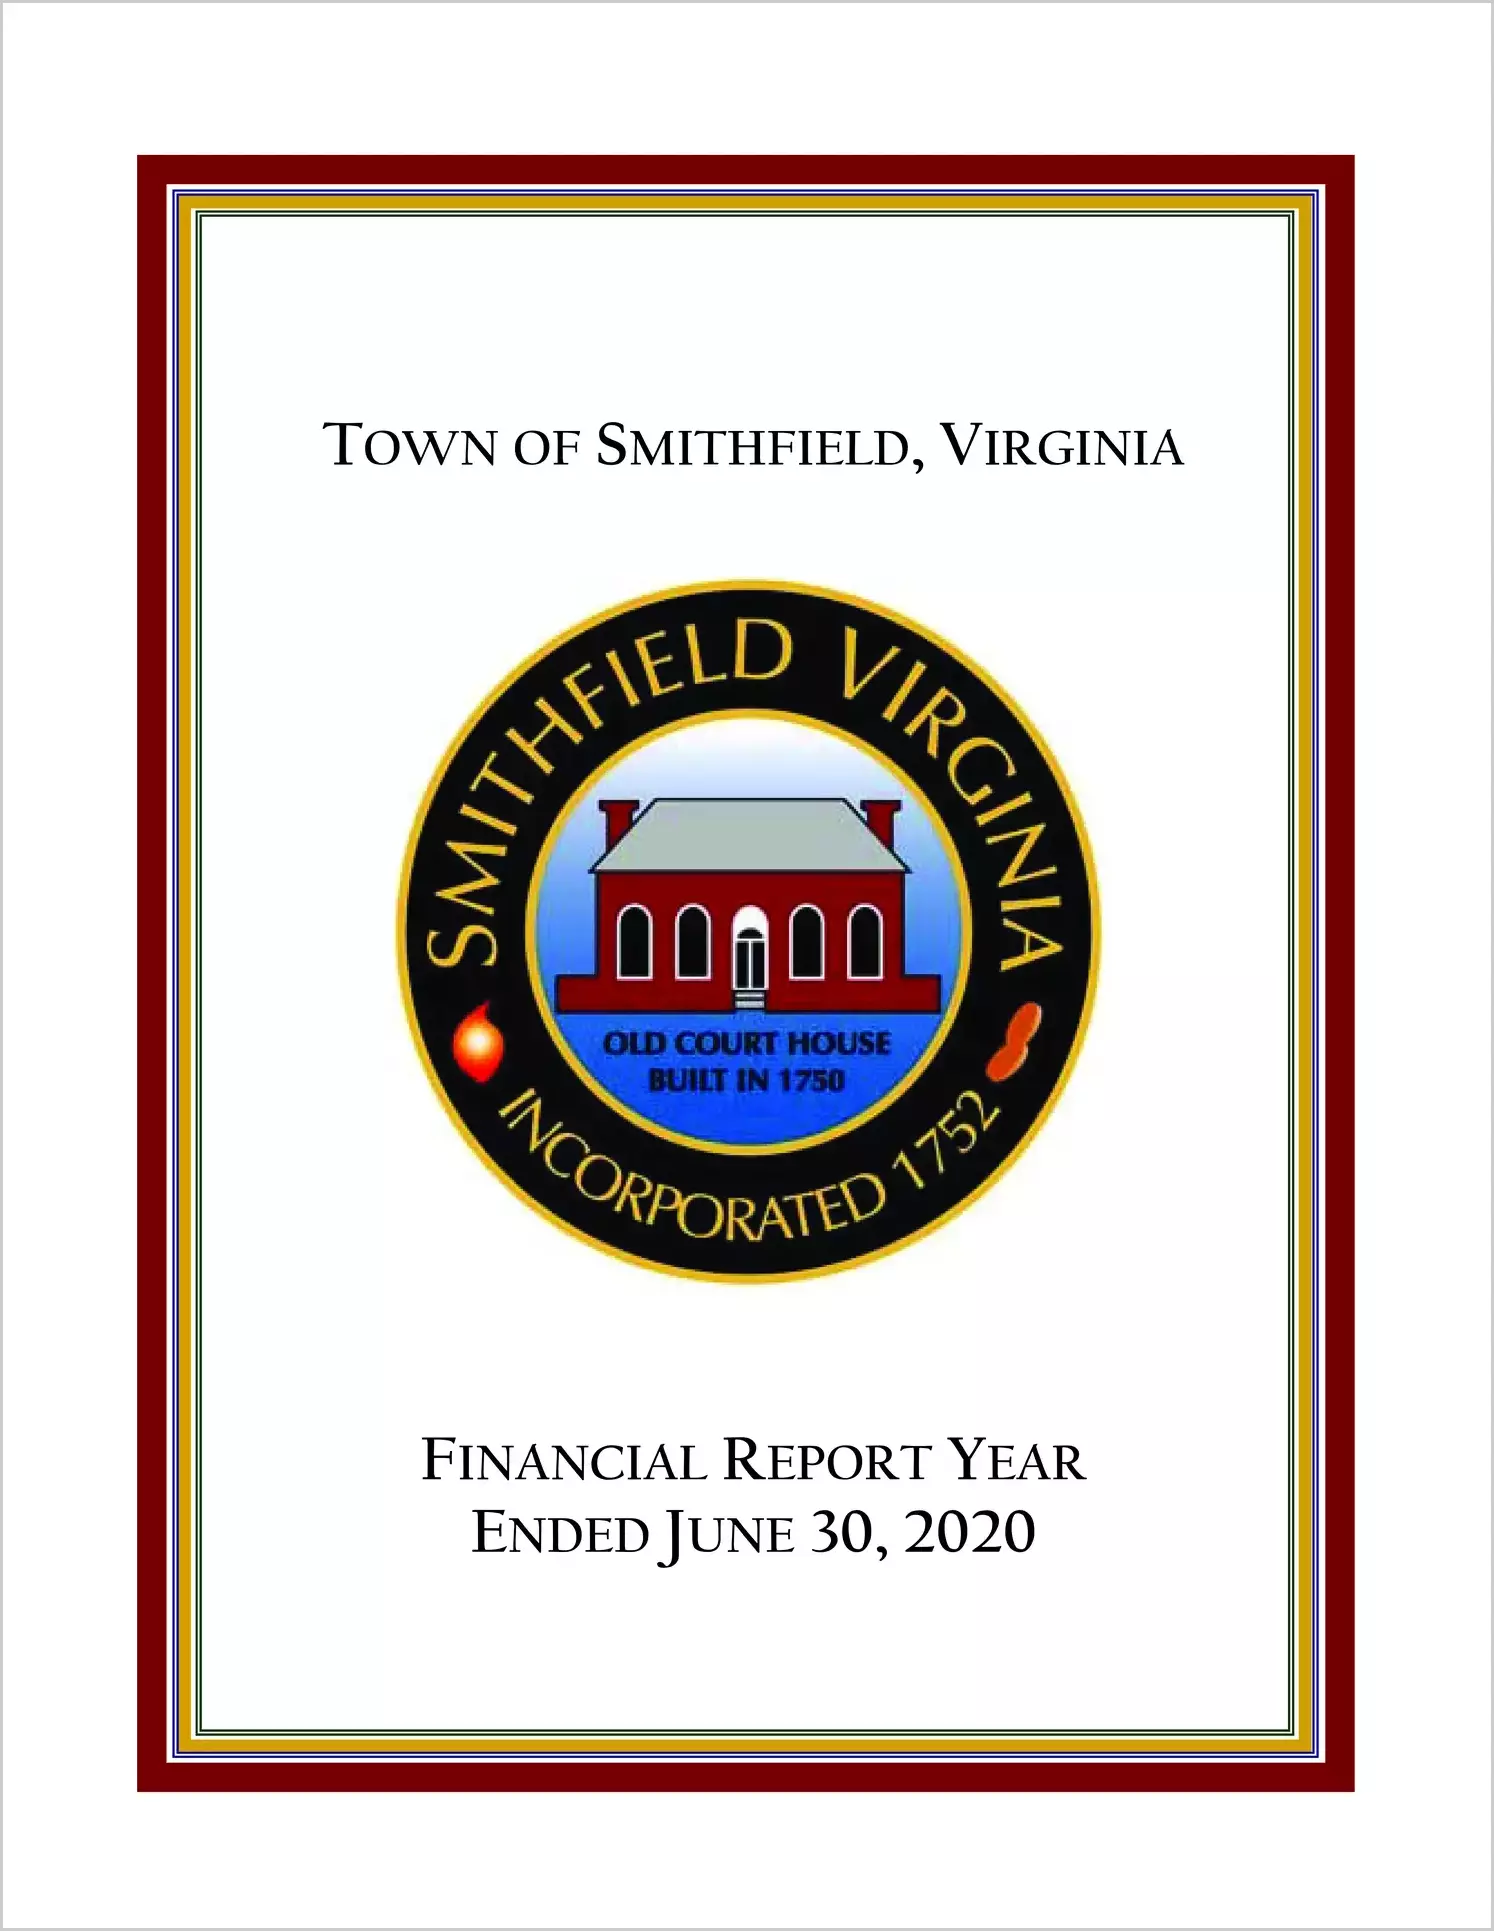 2020 Annual Financial Report for Town of Smithfield